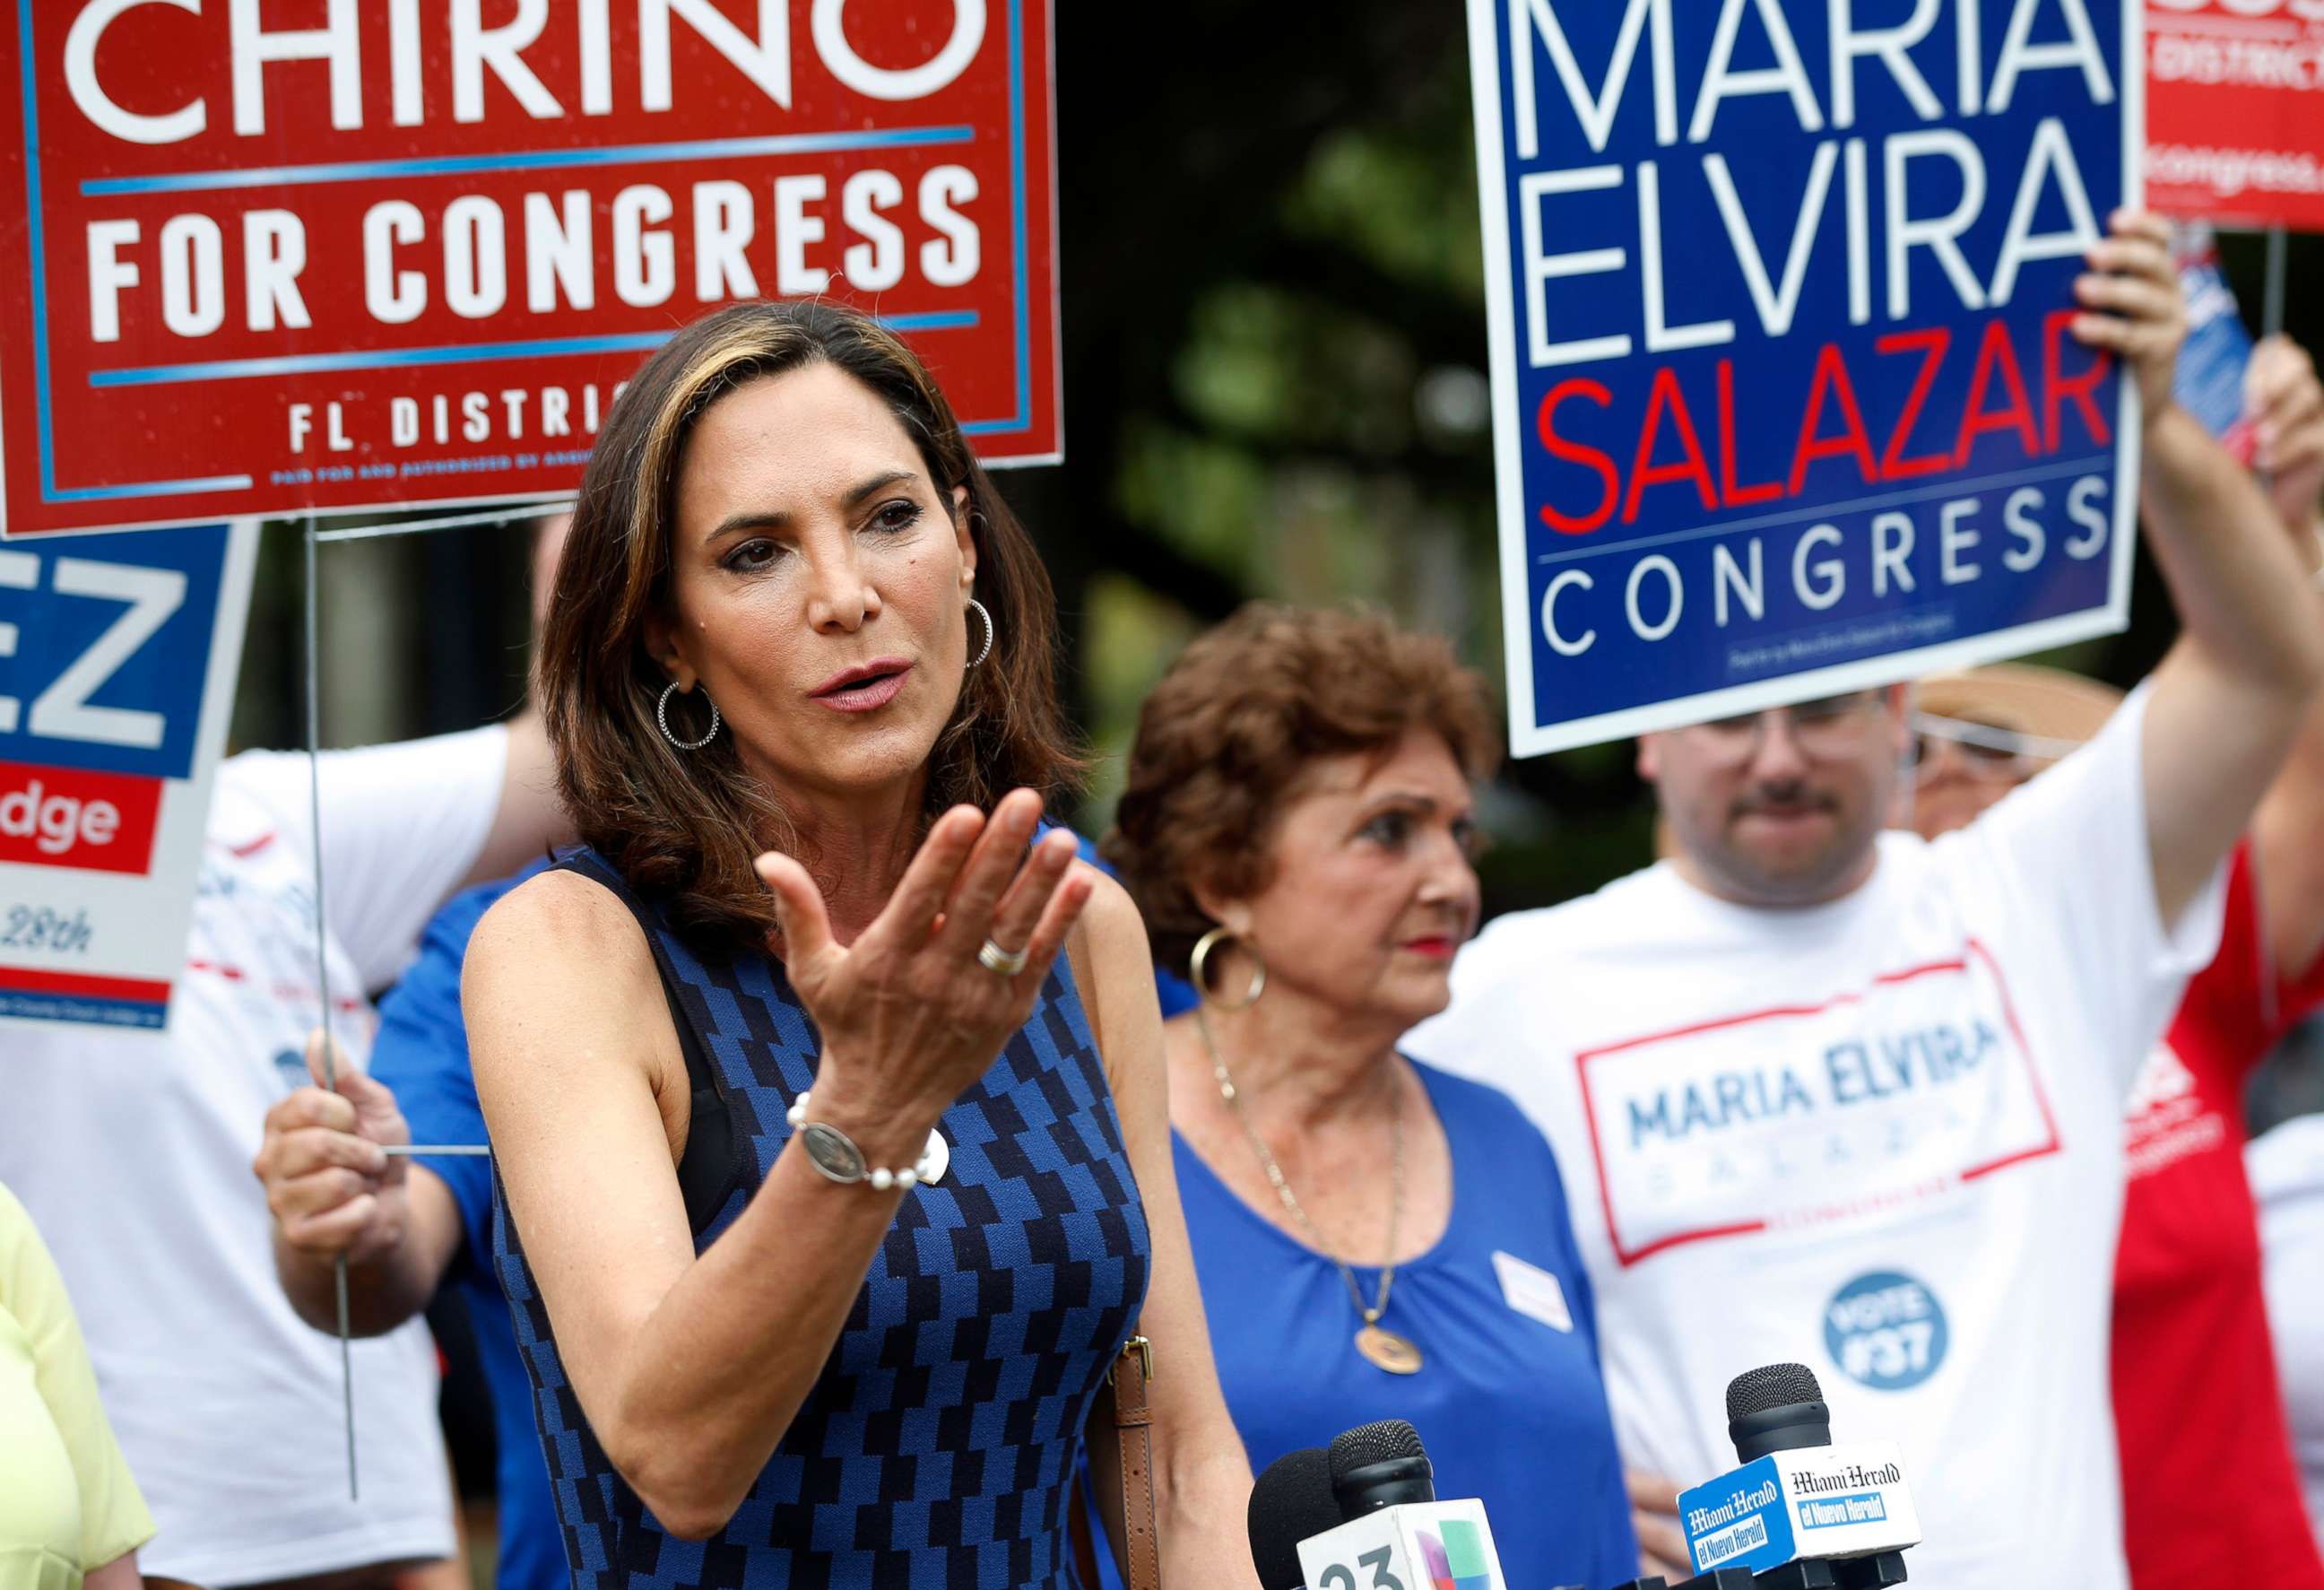 PHOTO: In this file photo, Maria Elvira Salazar speaks with members of the media outside a polling station at the Coral Gables Branch Library, during the 2018 Florida primary election, in Coral Gables, Fla., Aug. 28, 2018.